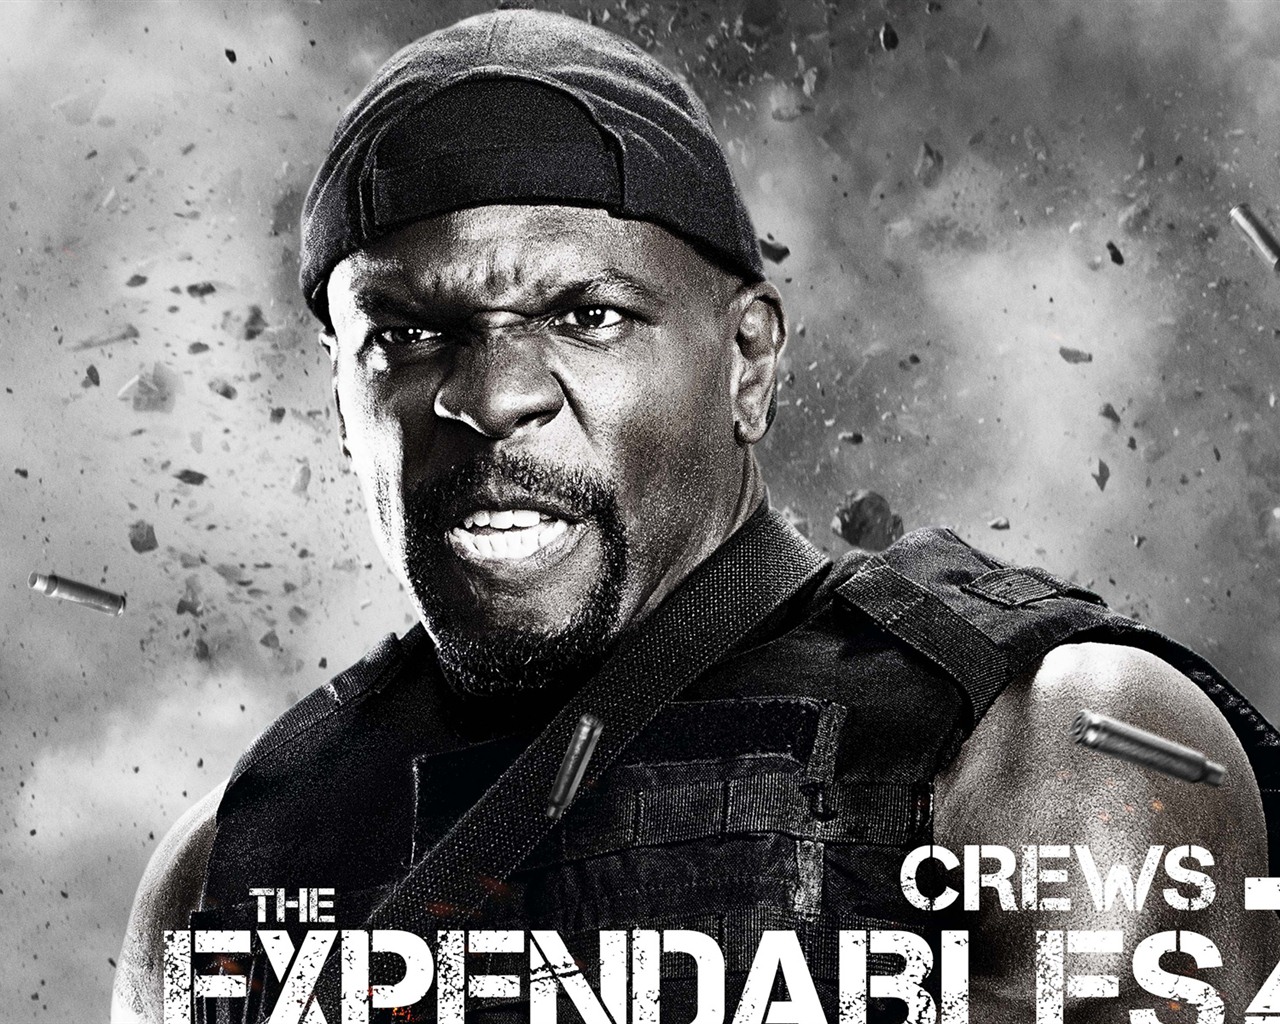 2012 The Expendables 2 敢死队2 高清壁纸10 - 1280x1024